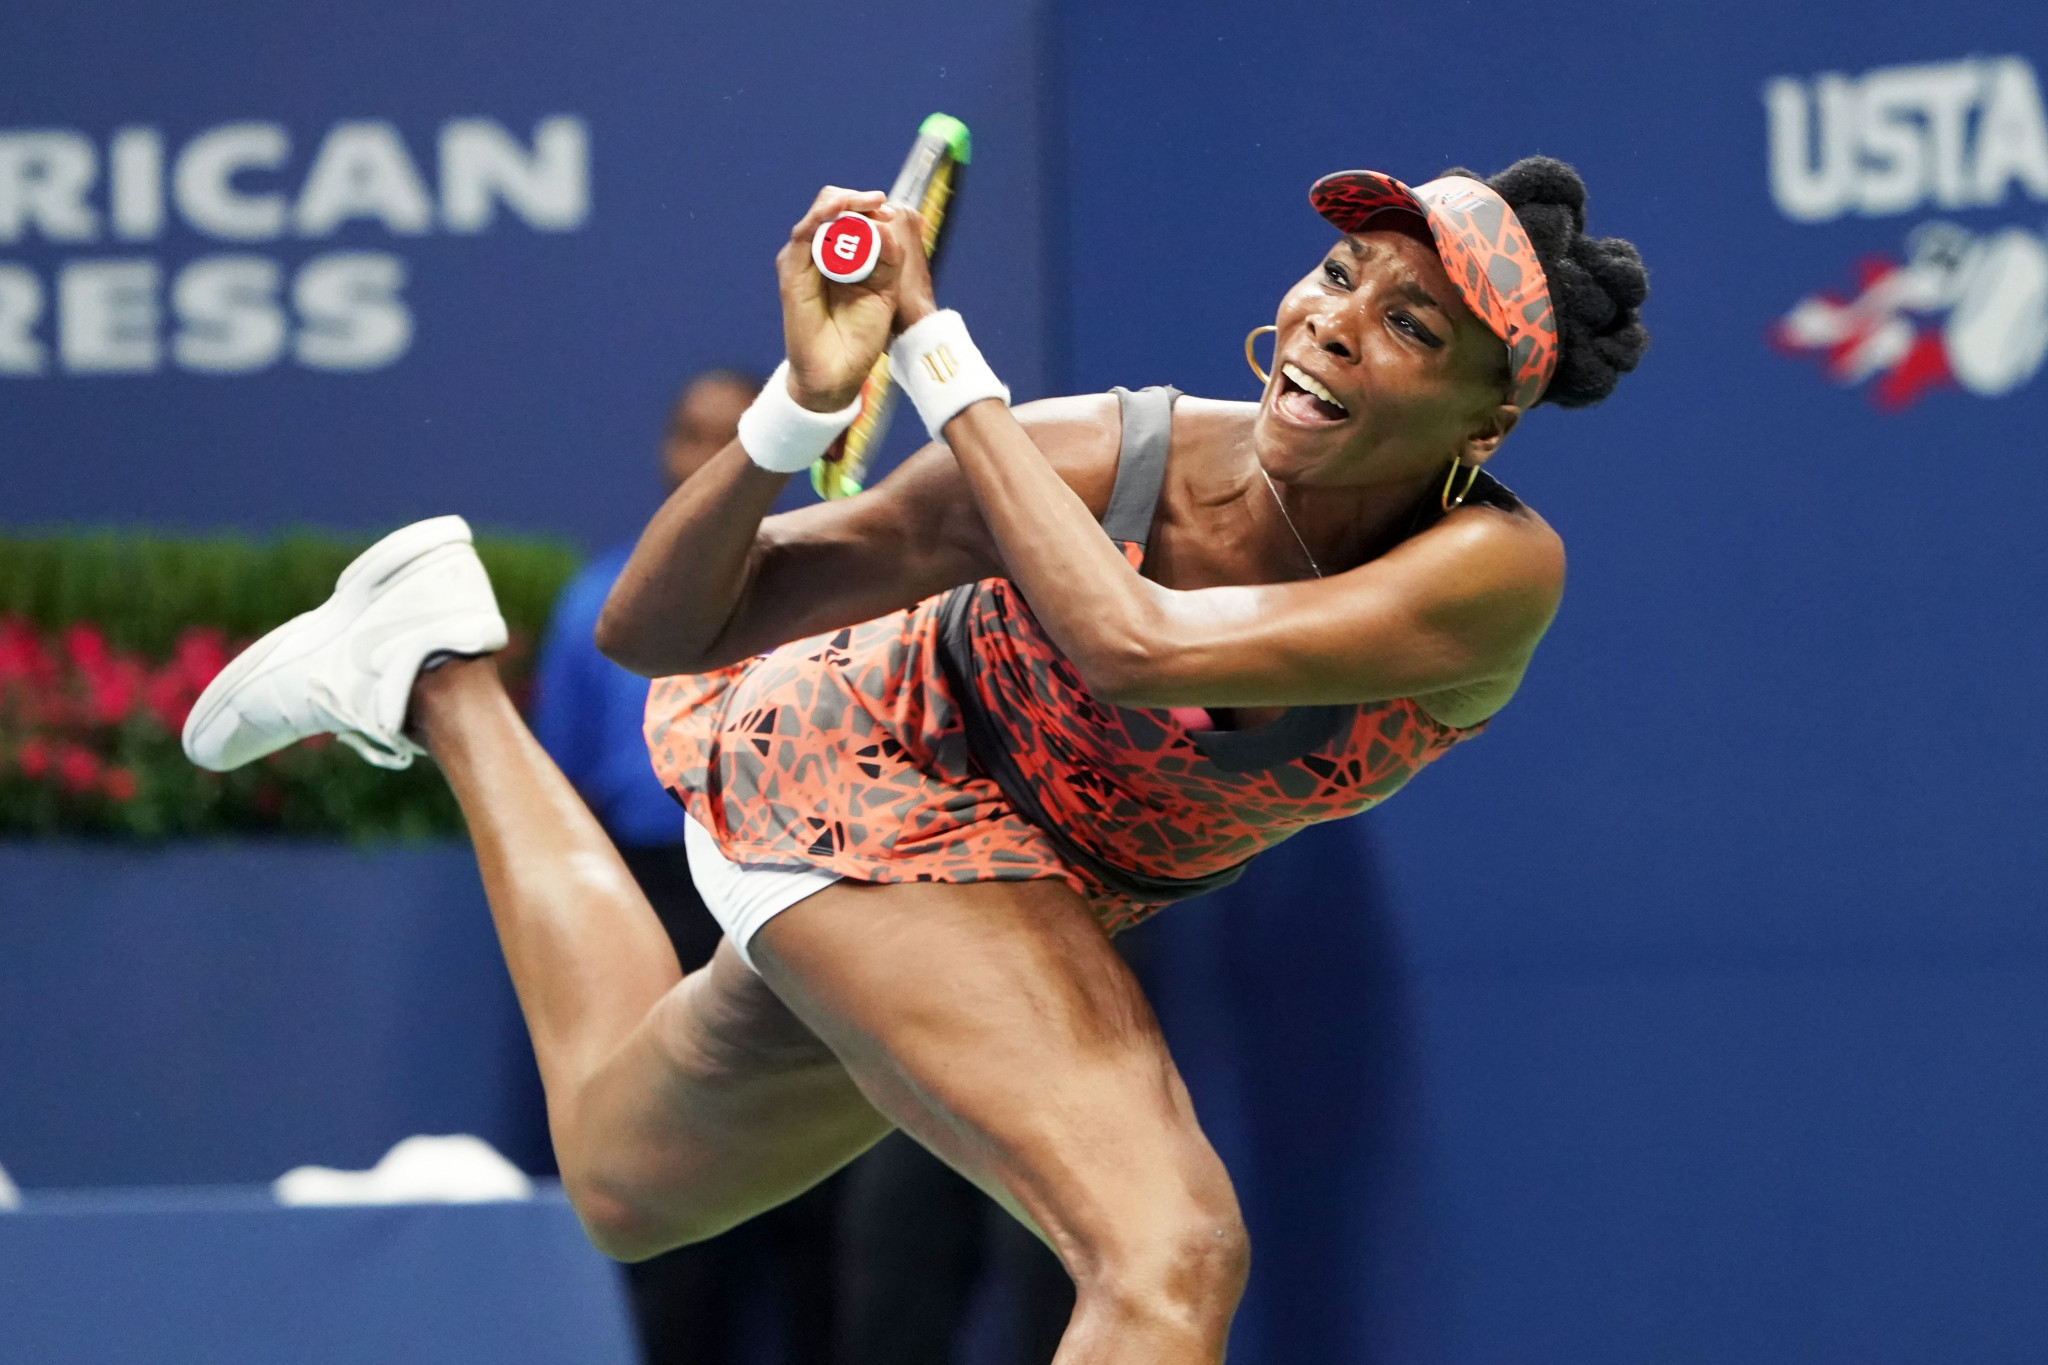 Williams reaches US Open semi-finals after thrilling win over Kvitová 